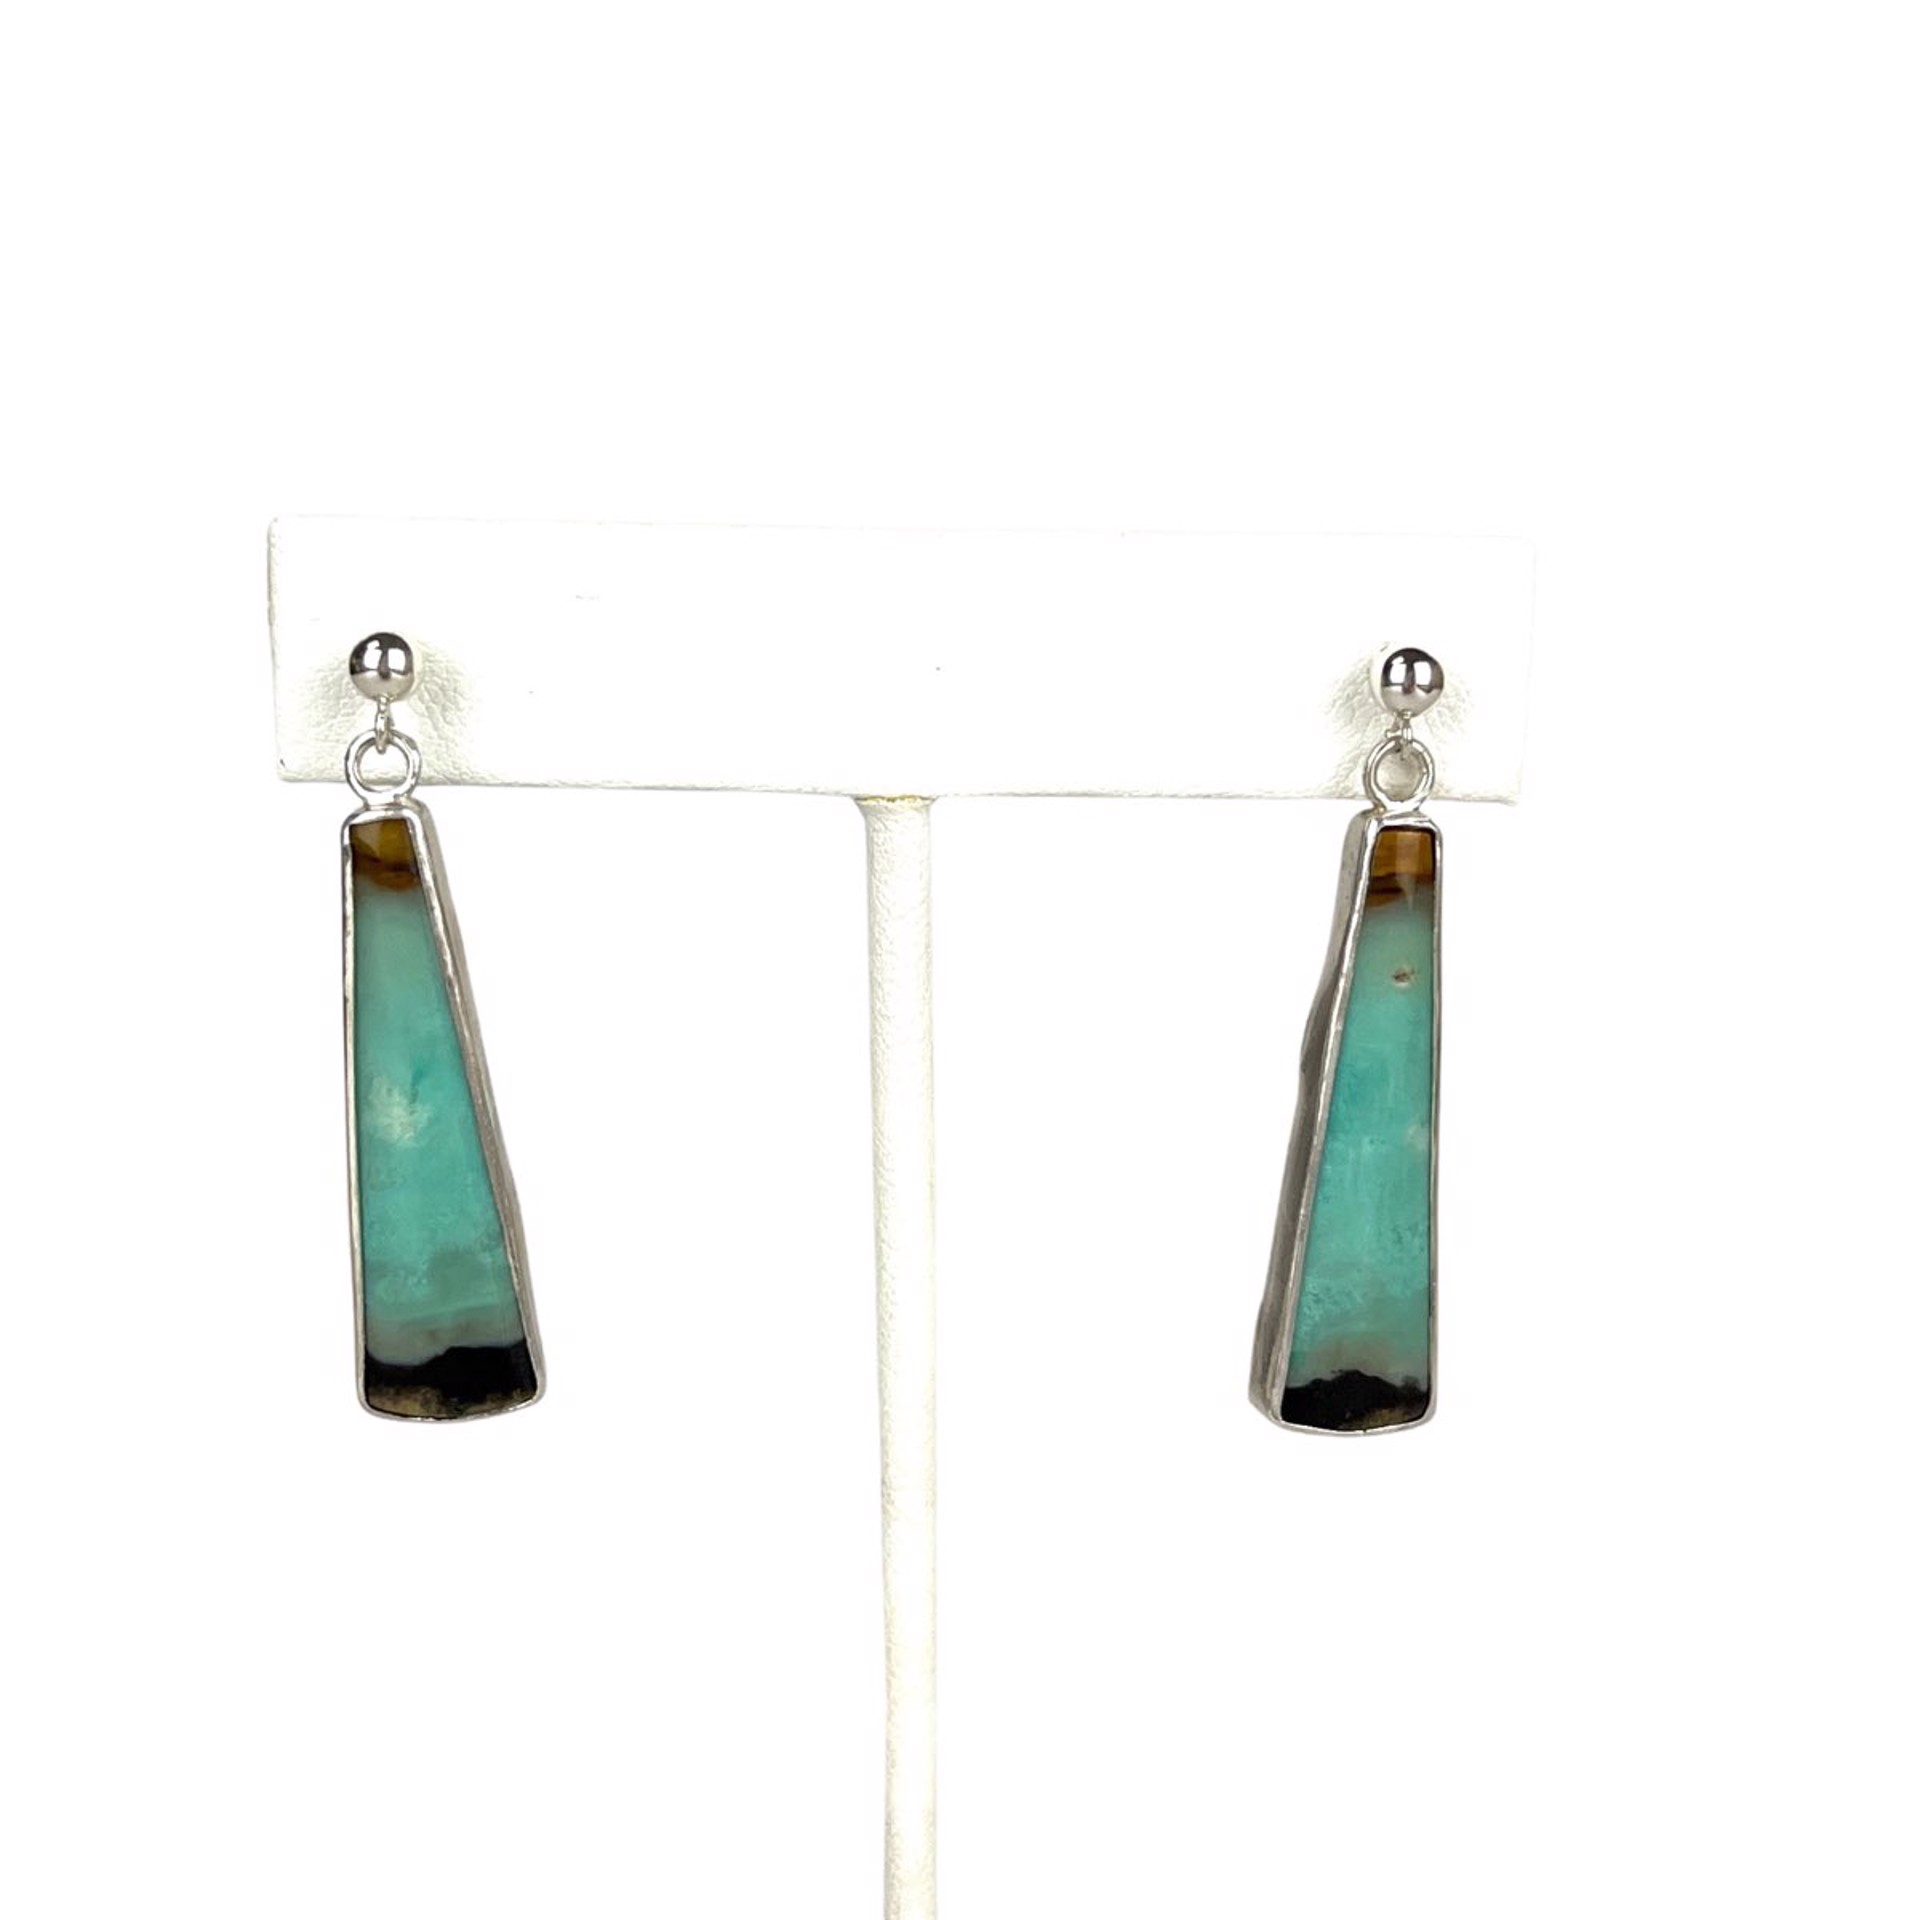 Opalized Petrified Wood and Sterling Silver Earrings by Nola Smodic